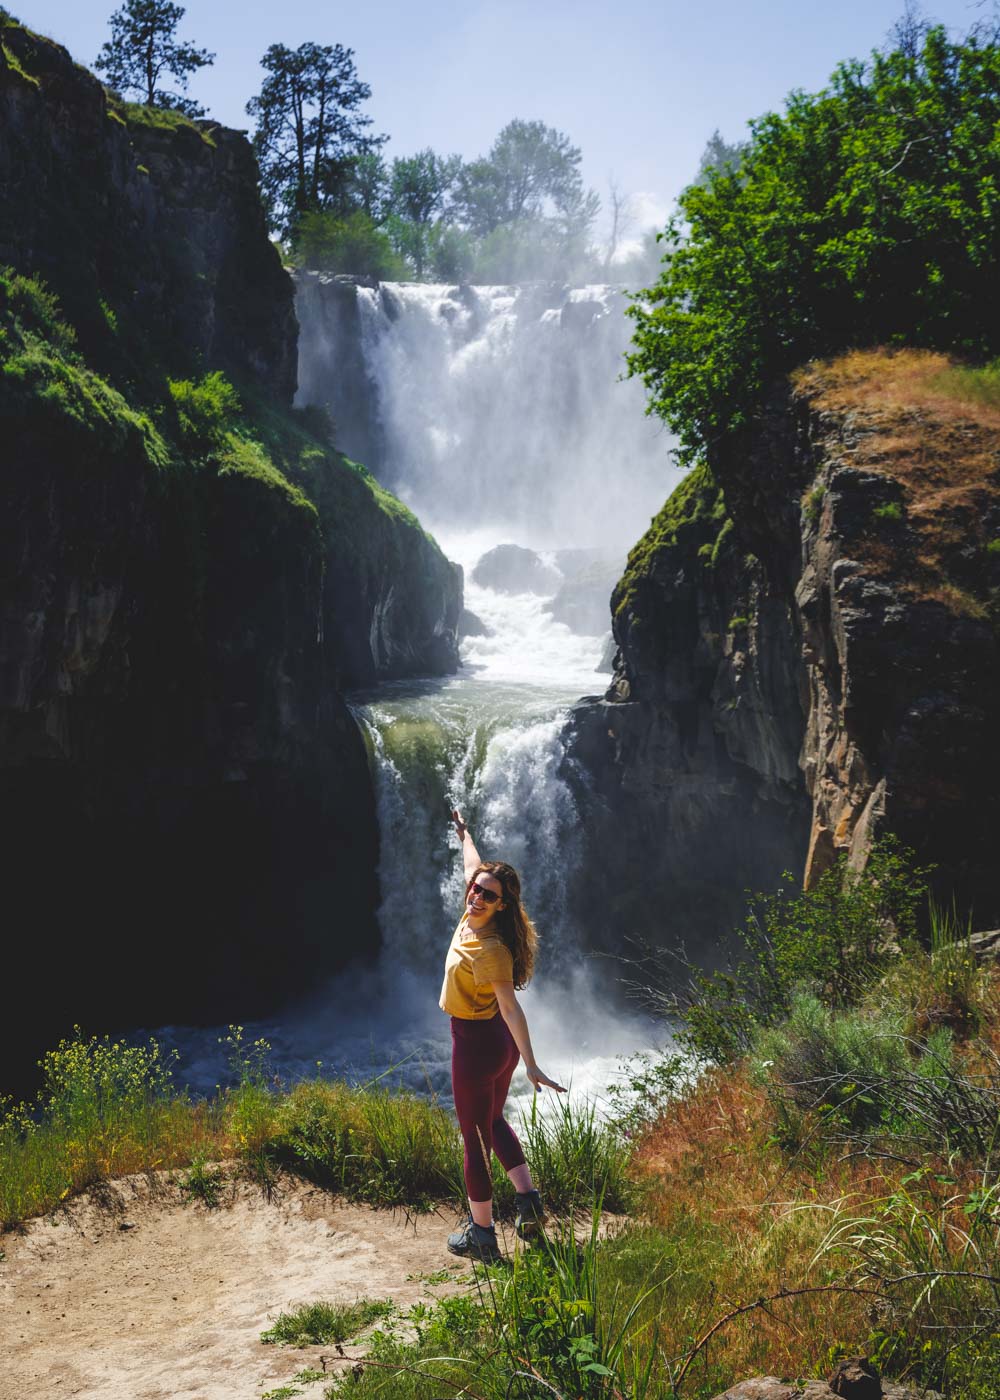 Nina posing happily in front of the two-tiered White River Falls in Oregon.